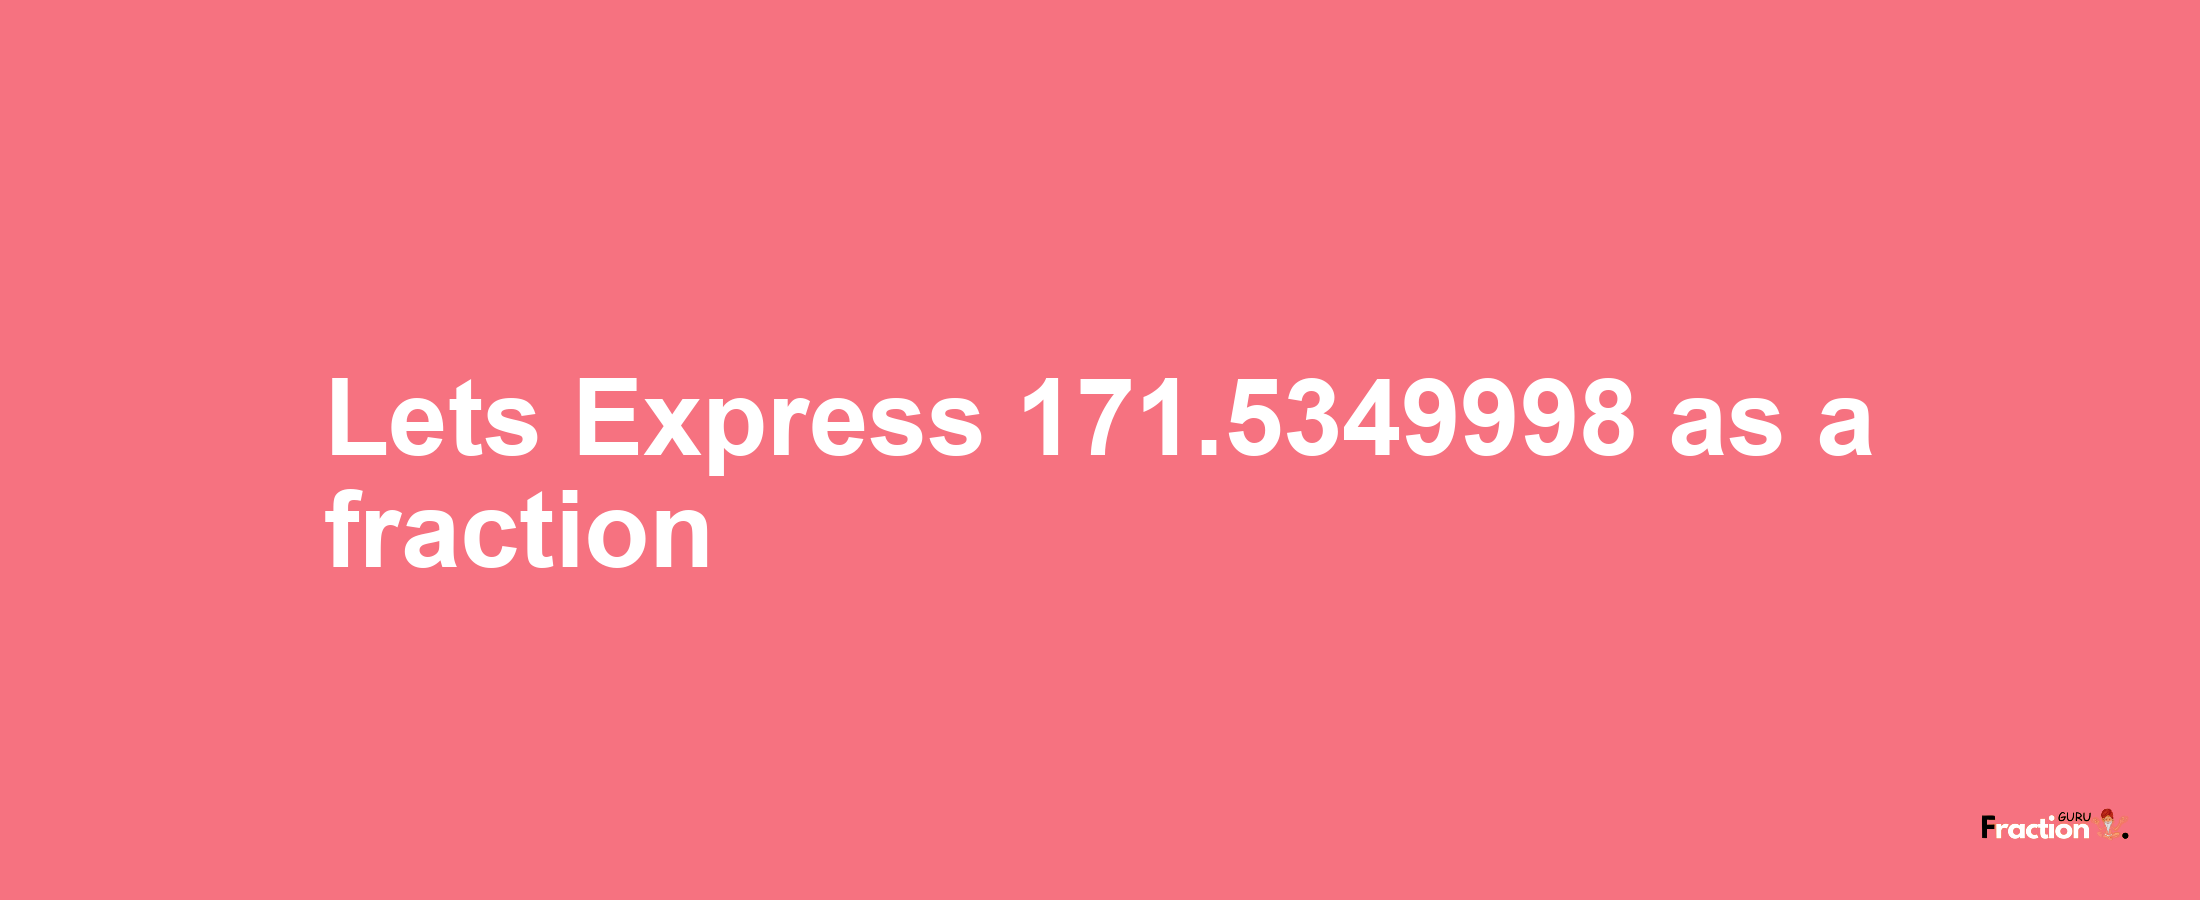 Lets Express 171.5349998 as afraction